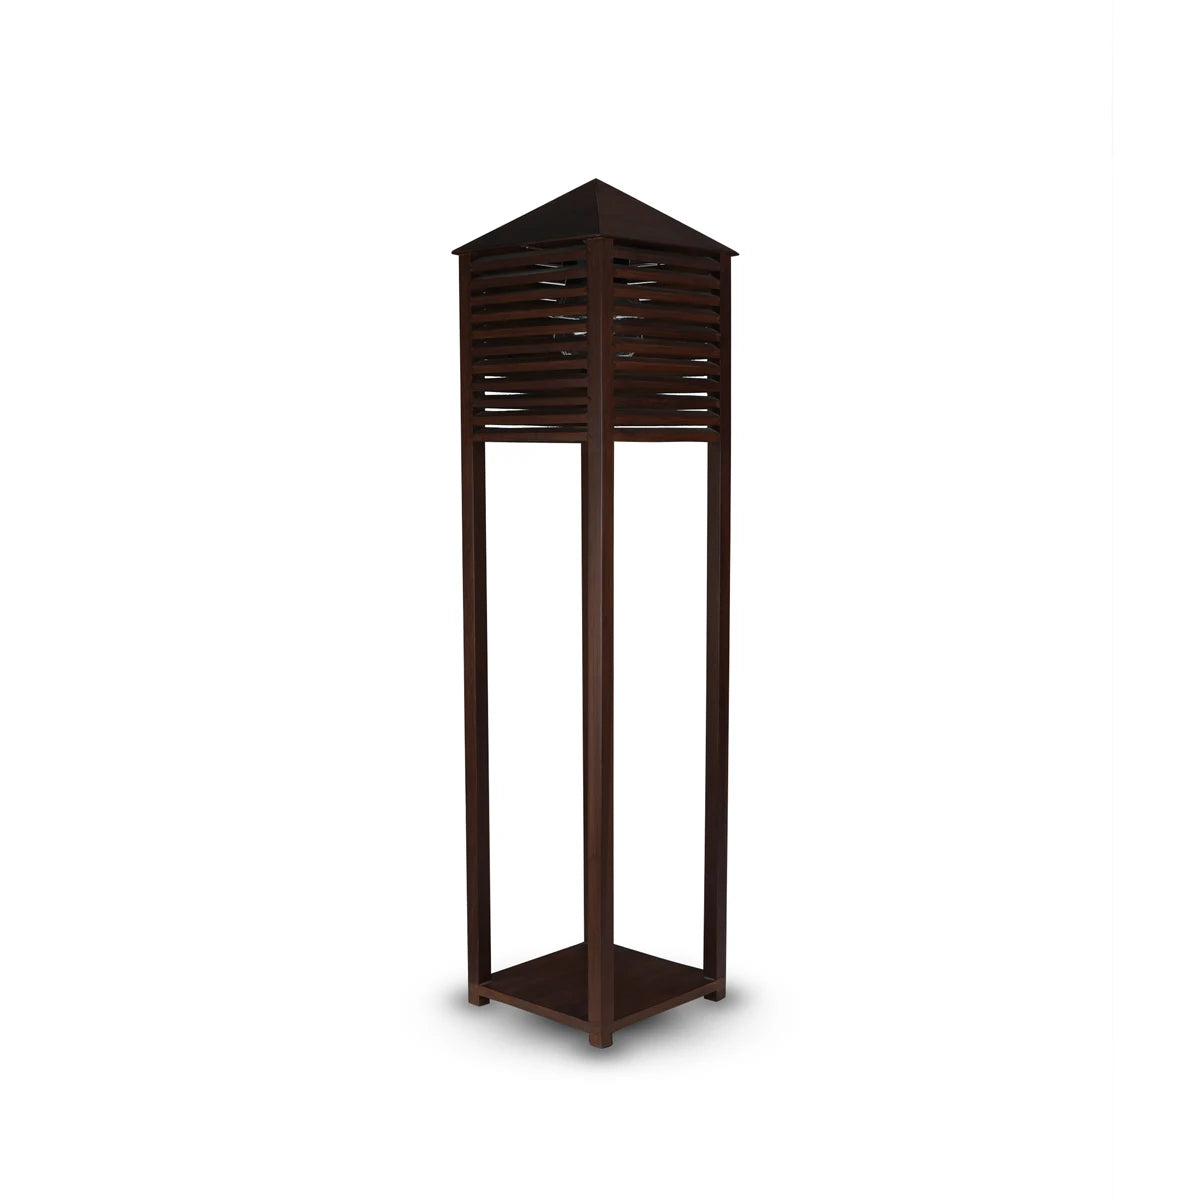 Front View of Contemporary Wooden Floor Lamp 